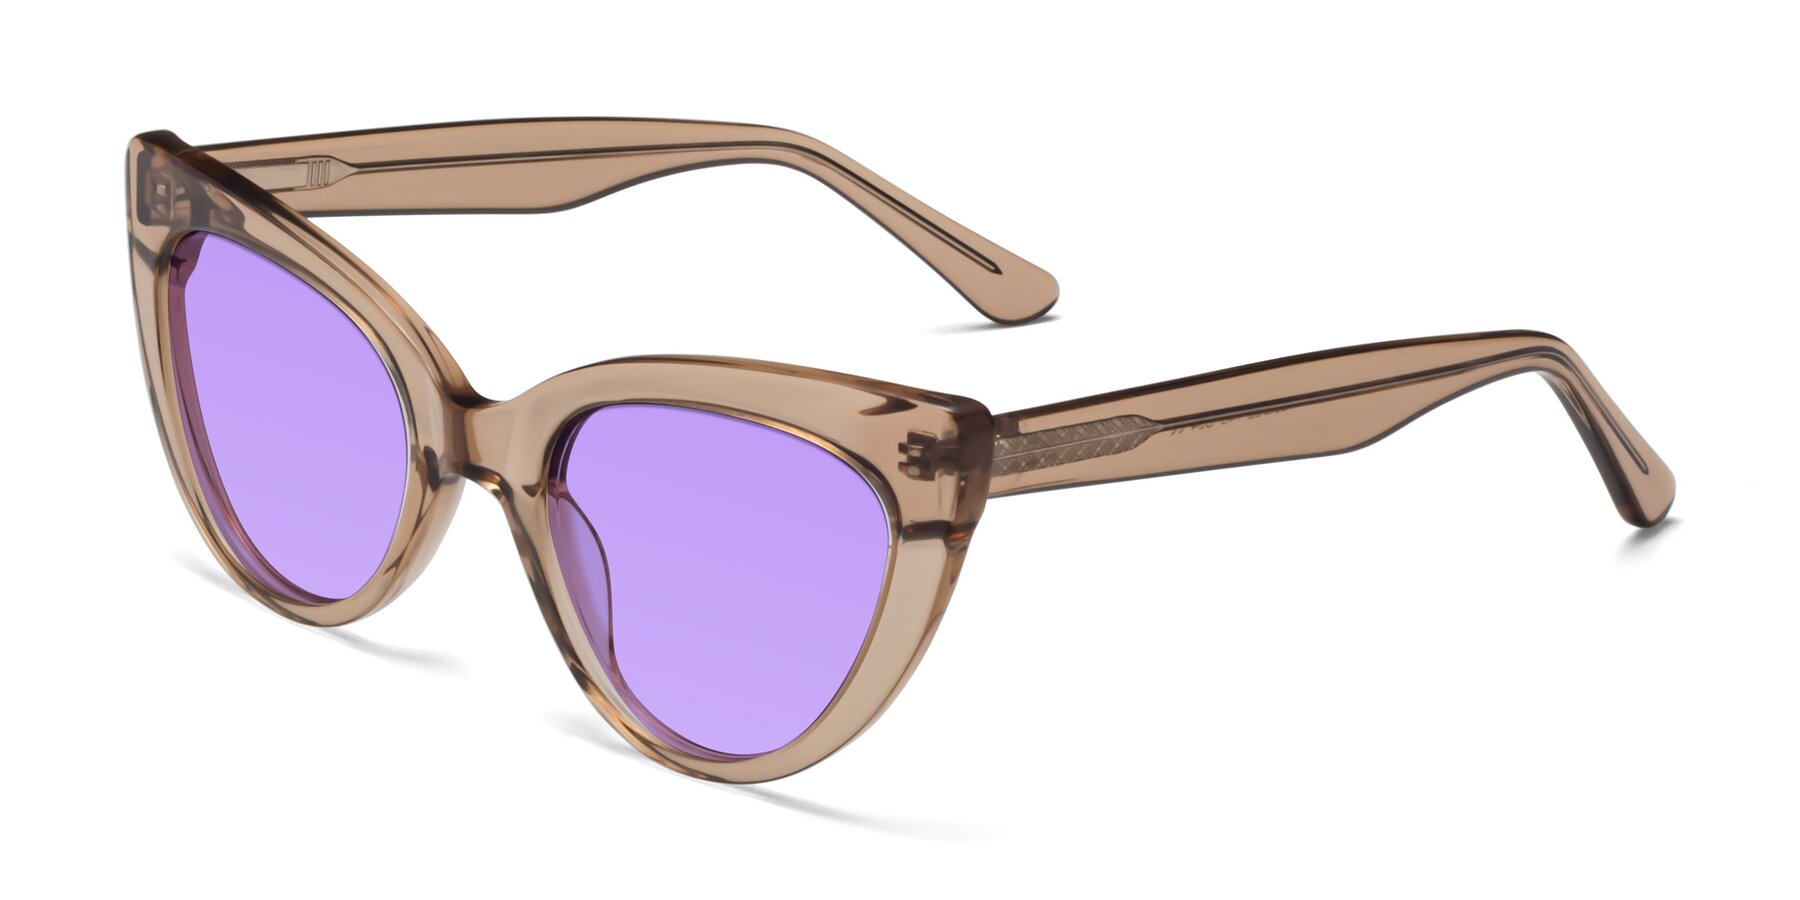 Angle of Tiesi in Caramel with Medium Purple Tinted Lenses